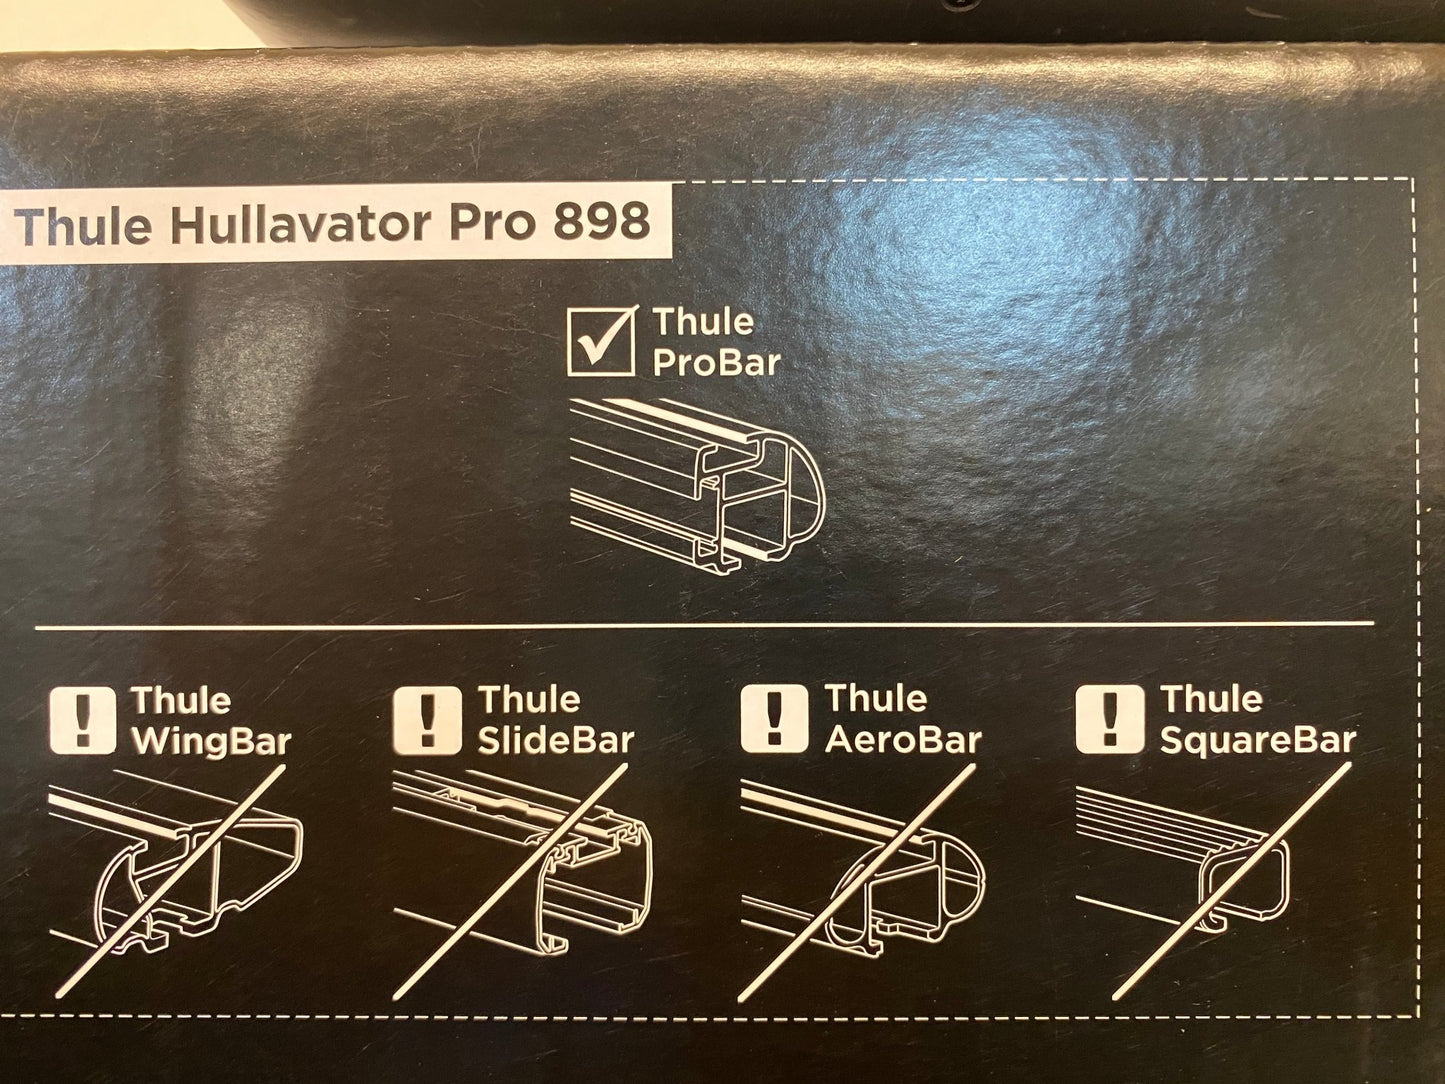 Thule Hullavator Pro 898000 - Letang Auto Electrical Vehicle Parts